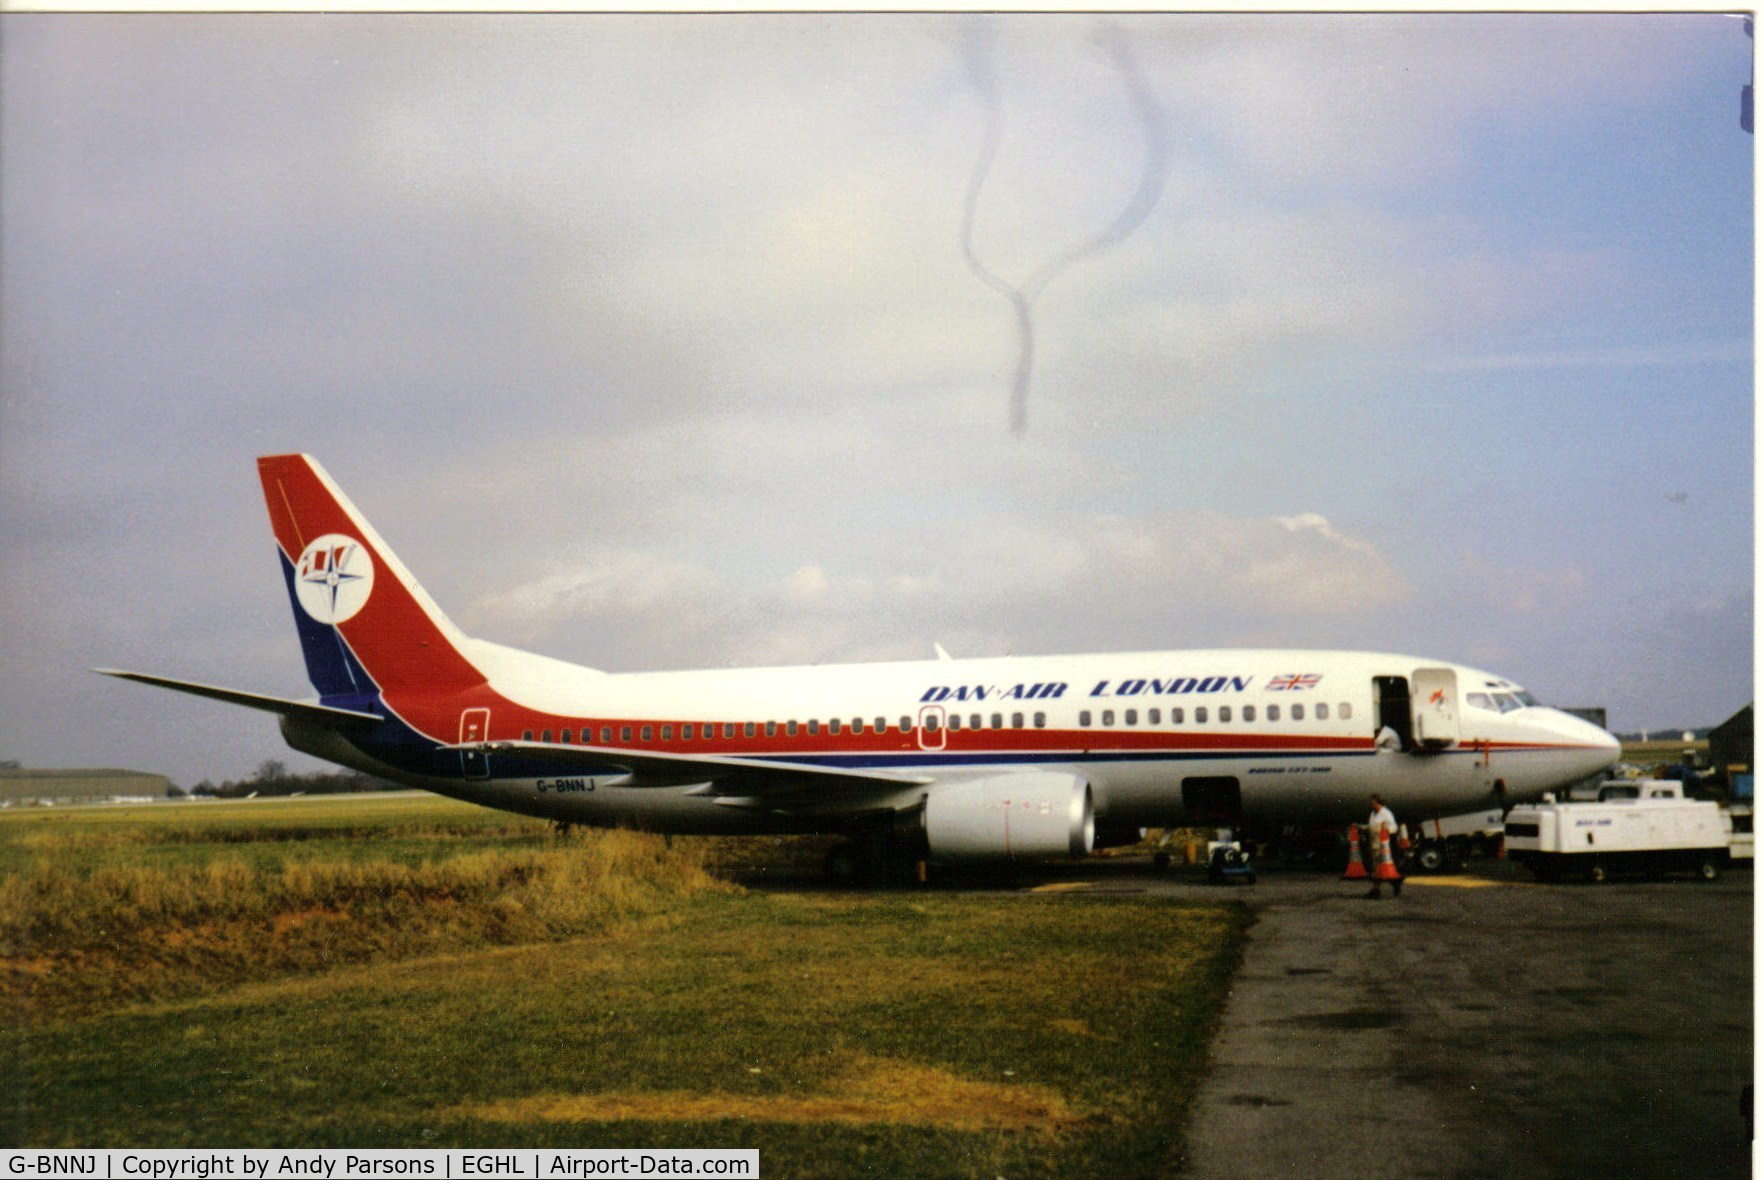 G-BNNJ, 1988 Boeing 737-3Q8 C/N 24068, Newly delivered to Dan Air not long before they went bust